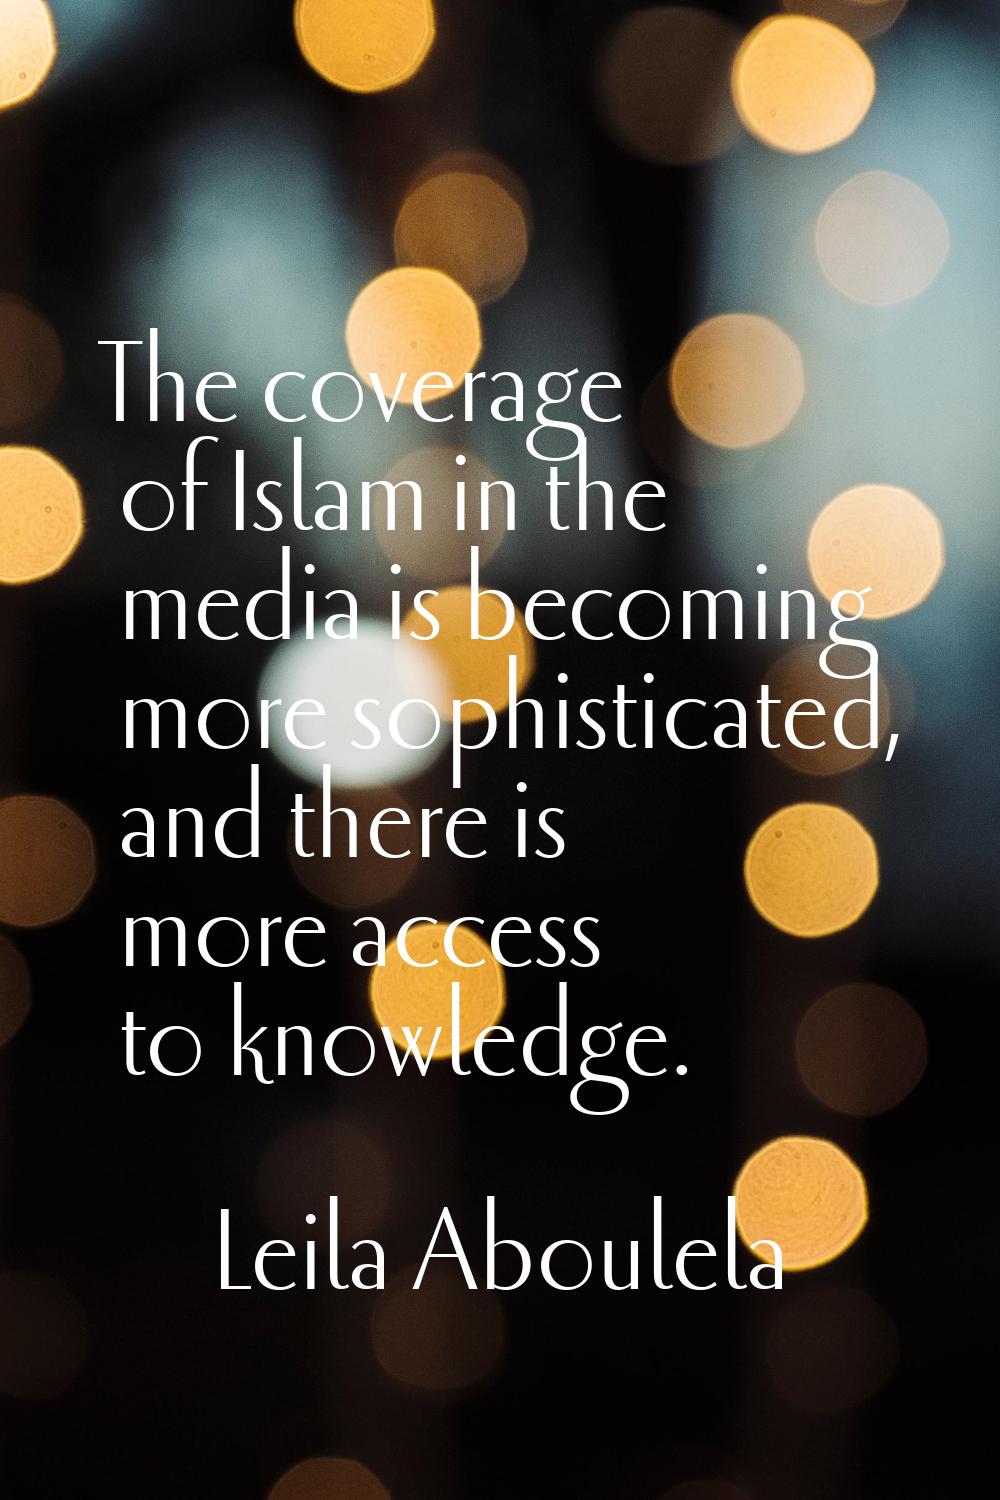 The coverage of Islam in the media is becoming more sophisticated, and there is more access to know